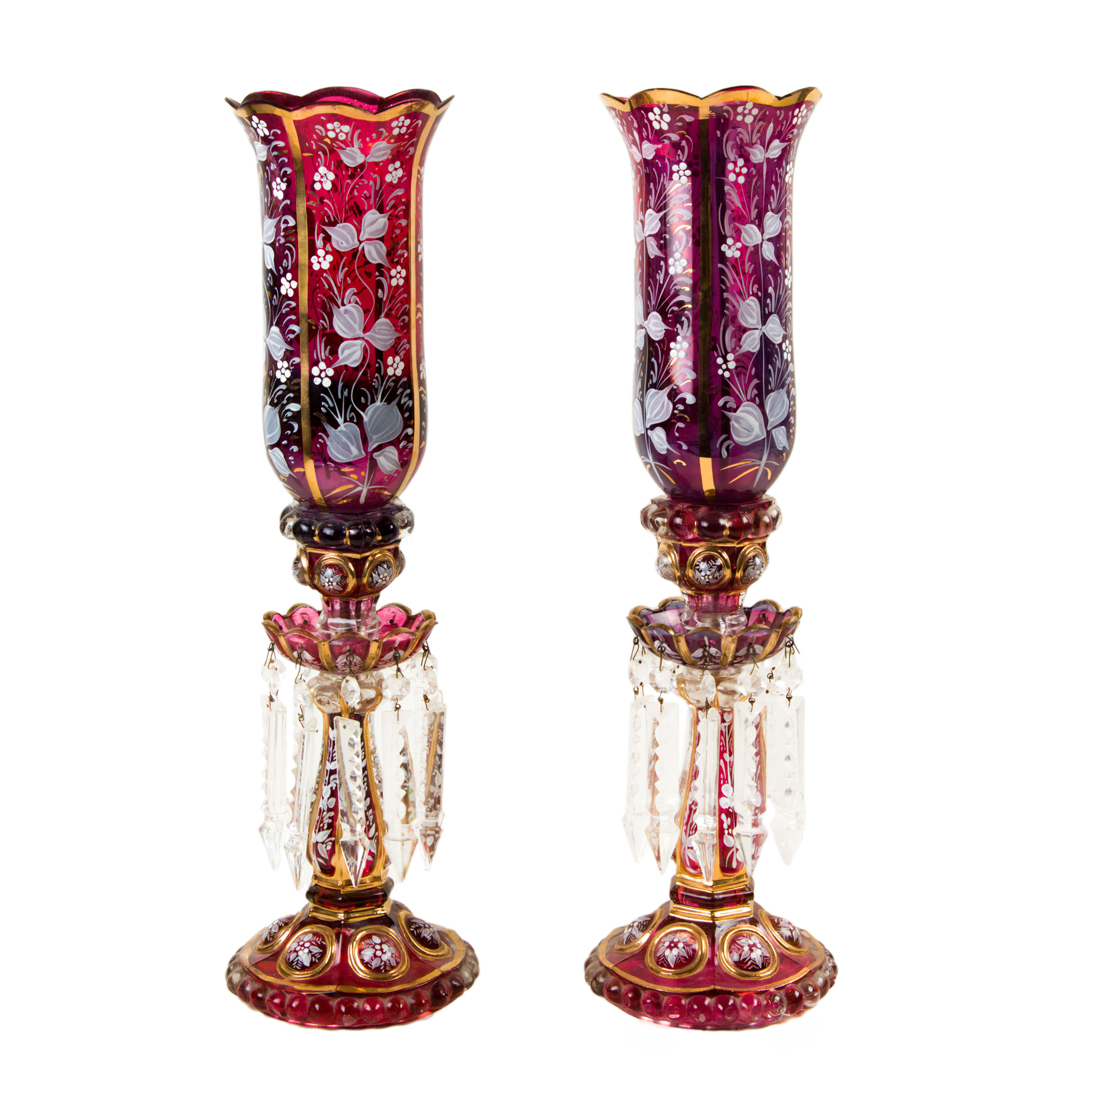 A PAIR OF BACCARAT STYLE ENAMELED